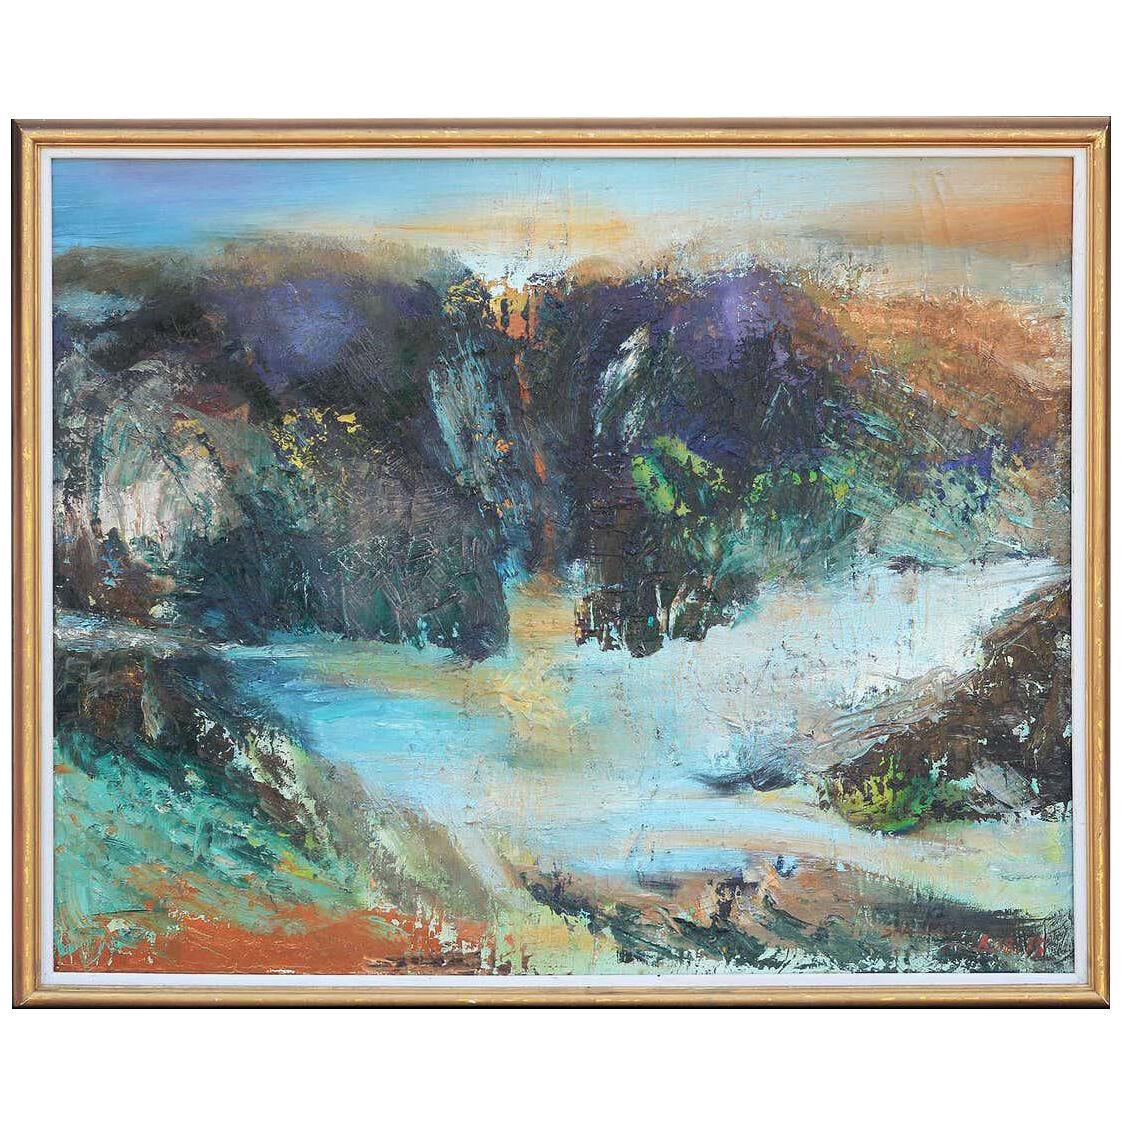 Sha Mo "Desert Dawn" Blue Toned Abstract Impressionist Waterfall Landscape